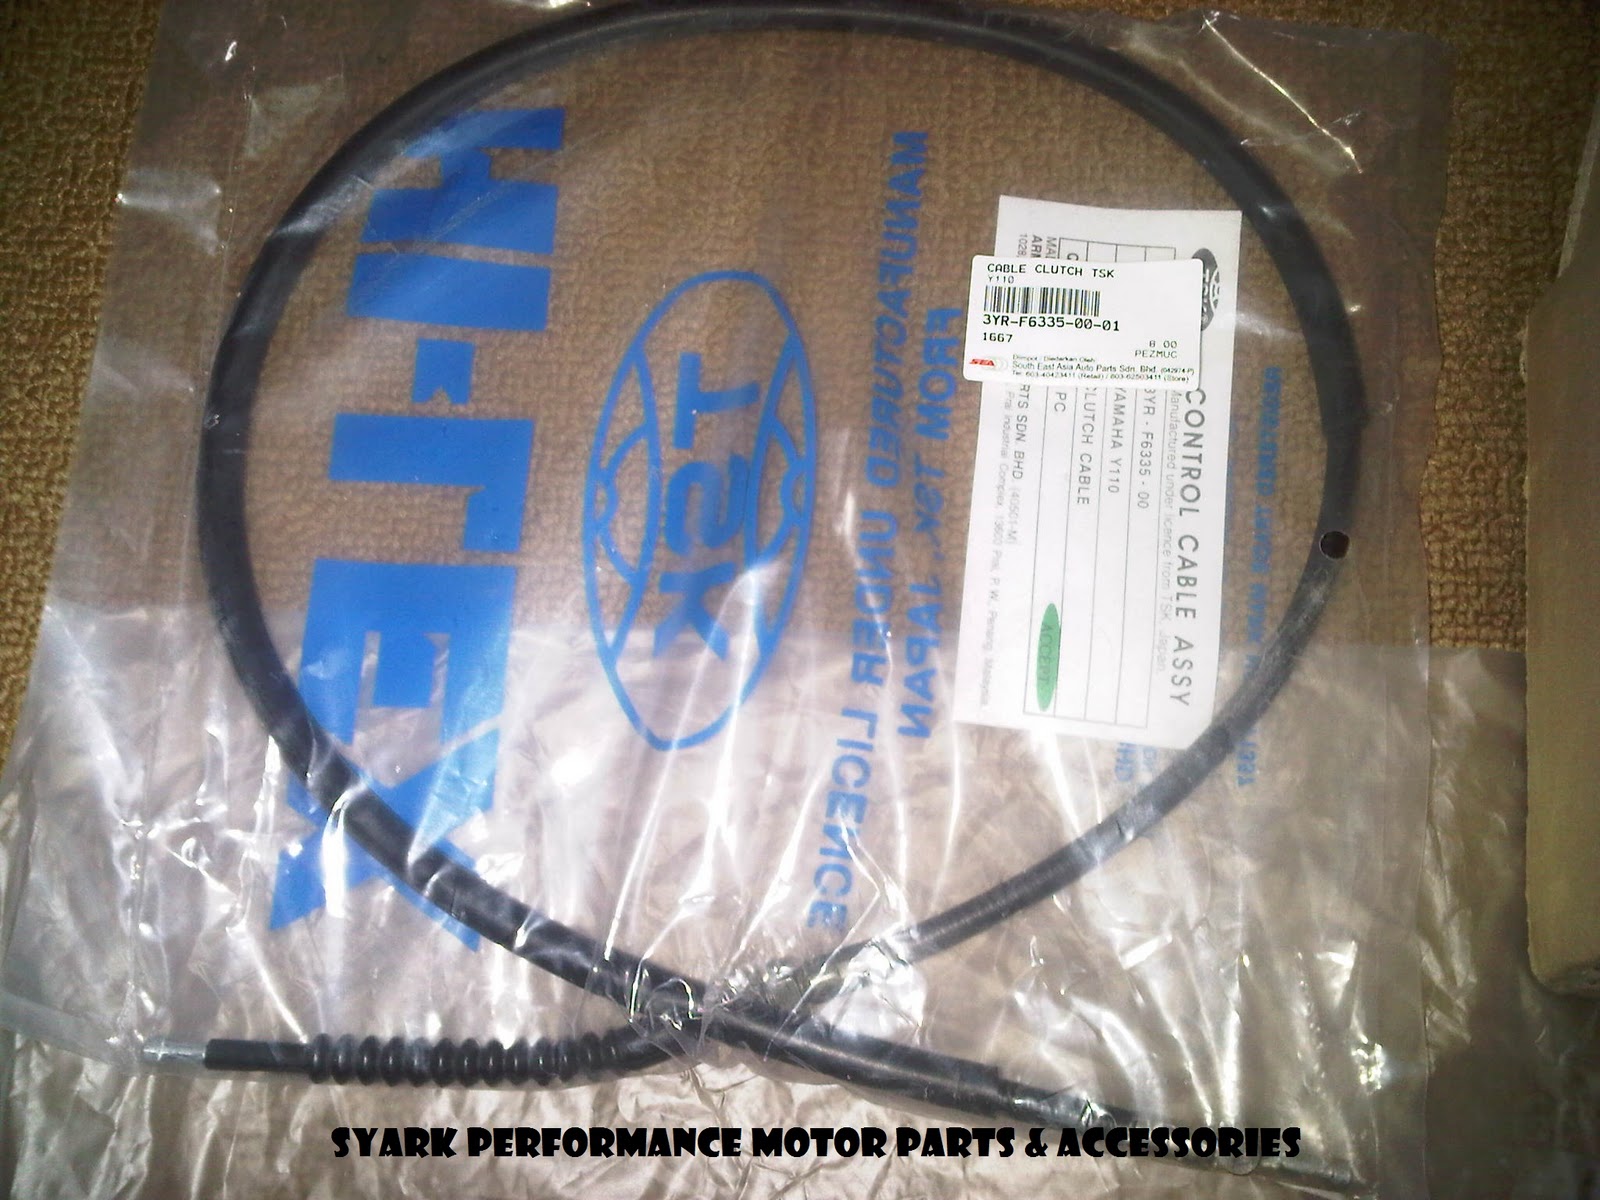 Syark Performance Motor Parts And Accessories Online Shop: New SYS